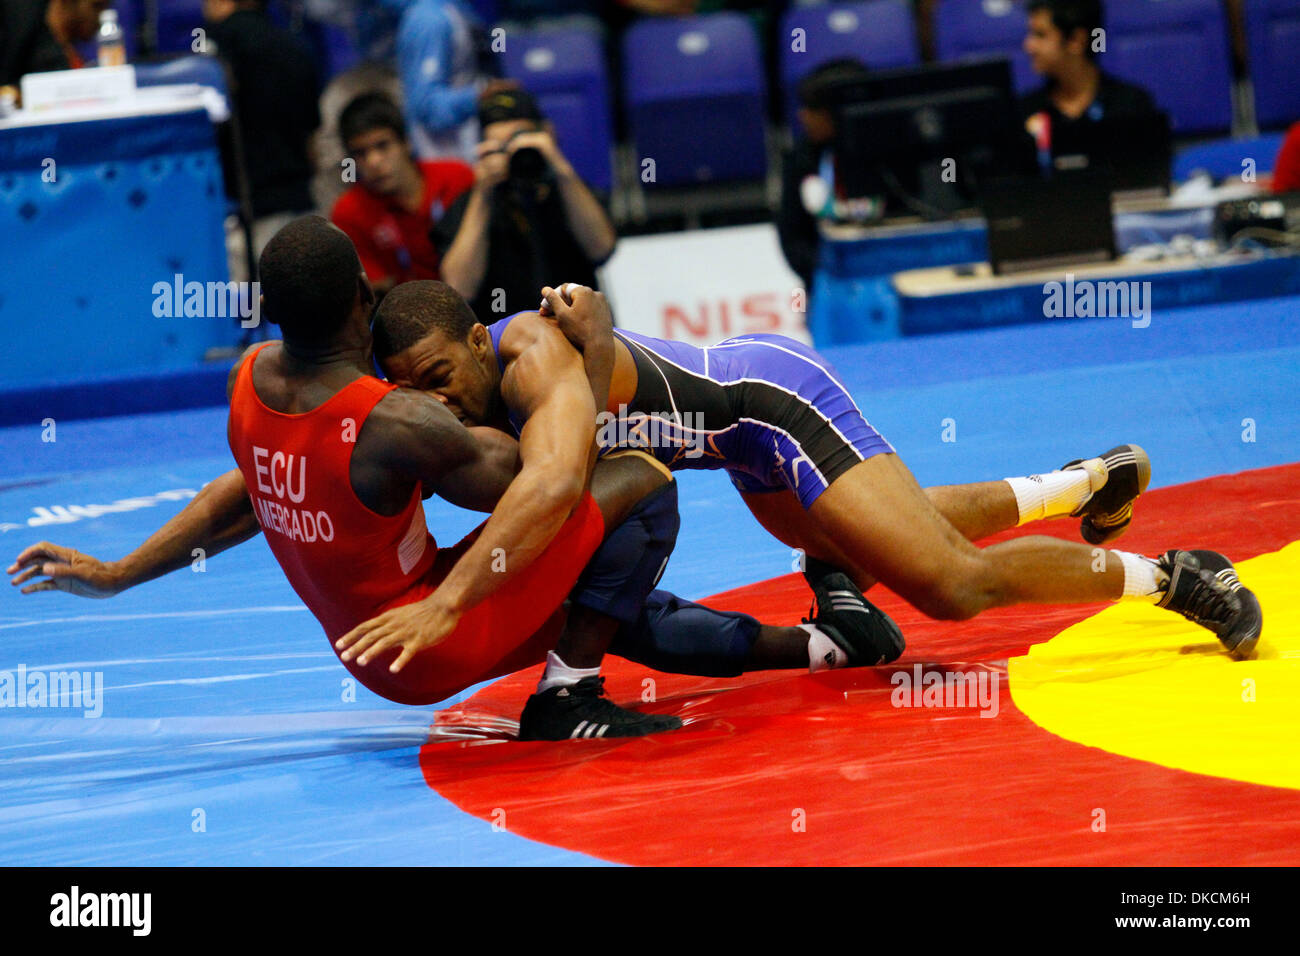 Oct. 24, 2011 - Guadalajara, Mexico - JORDAN BURROUGHS (blue) of the United States plows against JOSE MERCADO of Ecuador during the men's 74 kilogram  freestyle wrestling quarterfinals at the 2011 Pan American Games. Burroughts, a two-time NCAA title winner for the University of Nebraska, went on to win the gold medal against Yunierki Blanco of Cuba. (Credit Image: © Jeremy Brening Stock Photo